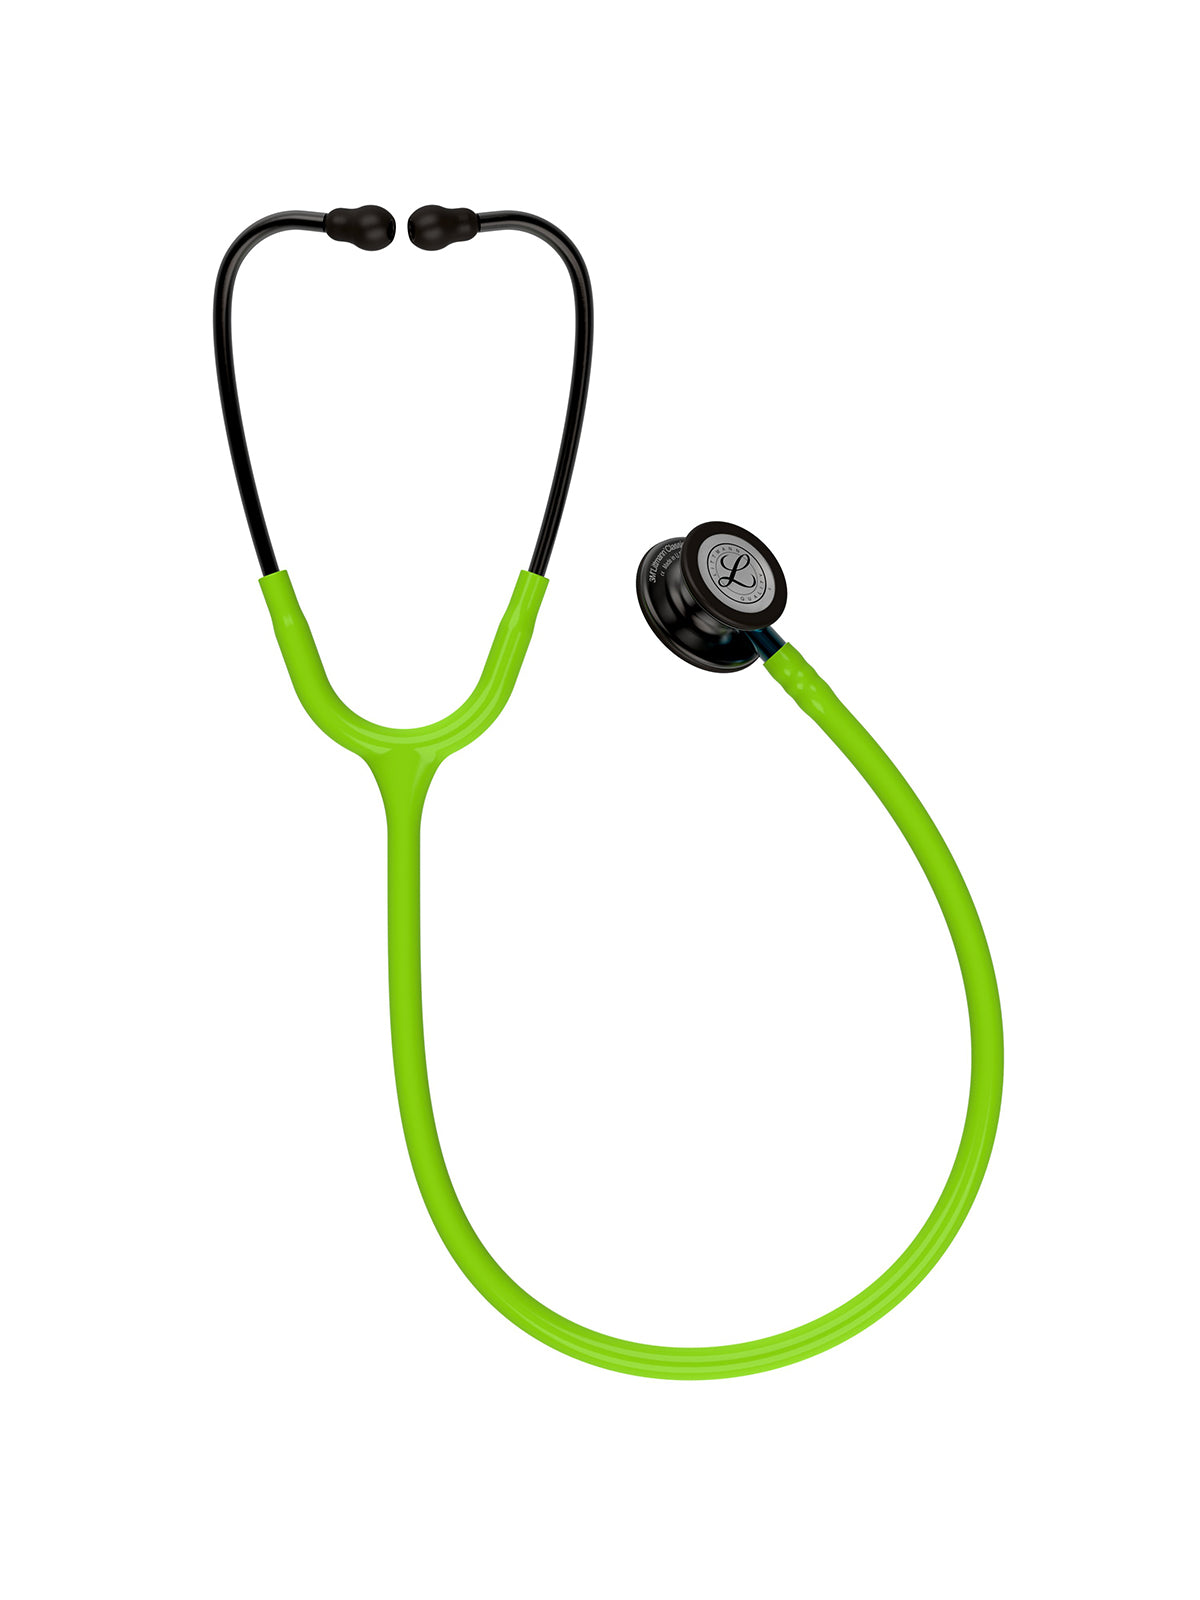 Classic III Monitoring Stethoscope - Lime Green with Smoke Finish